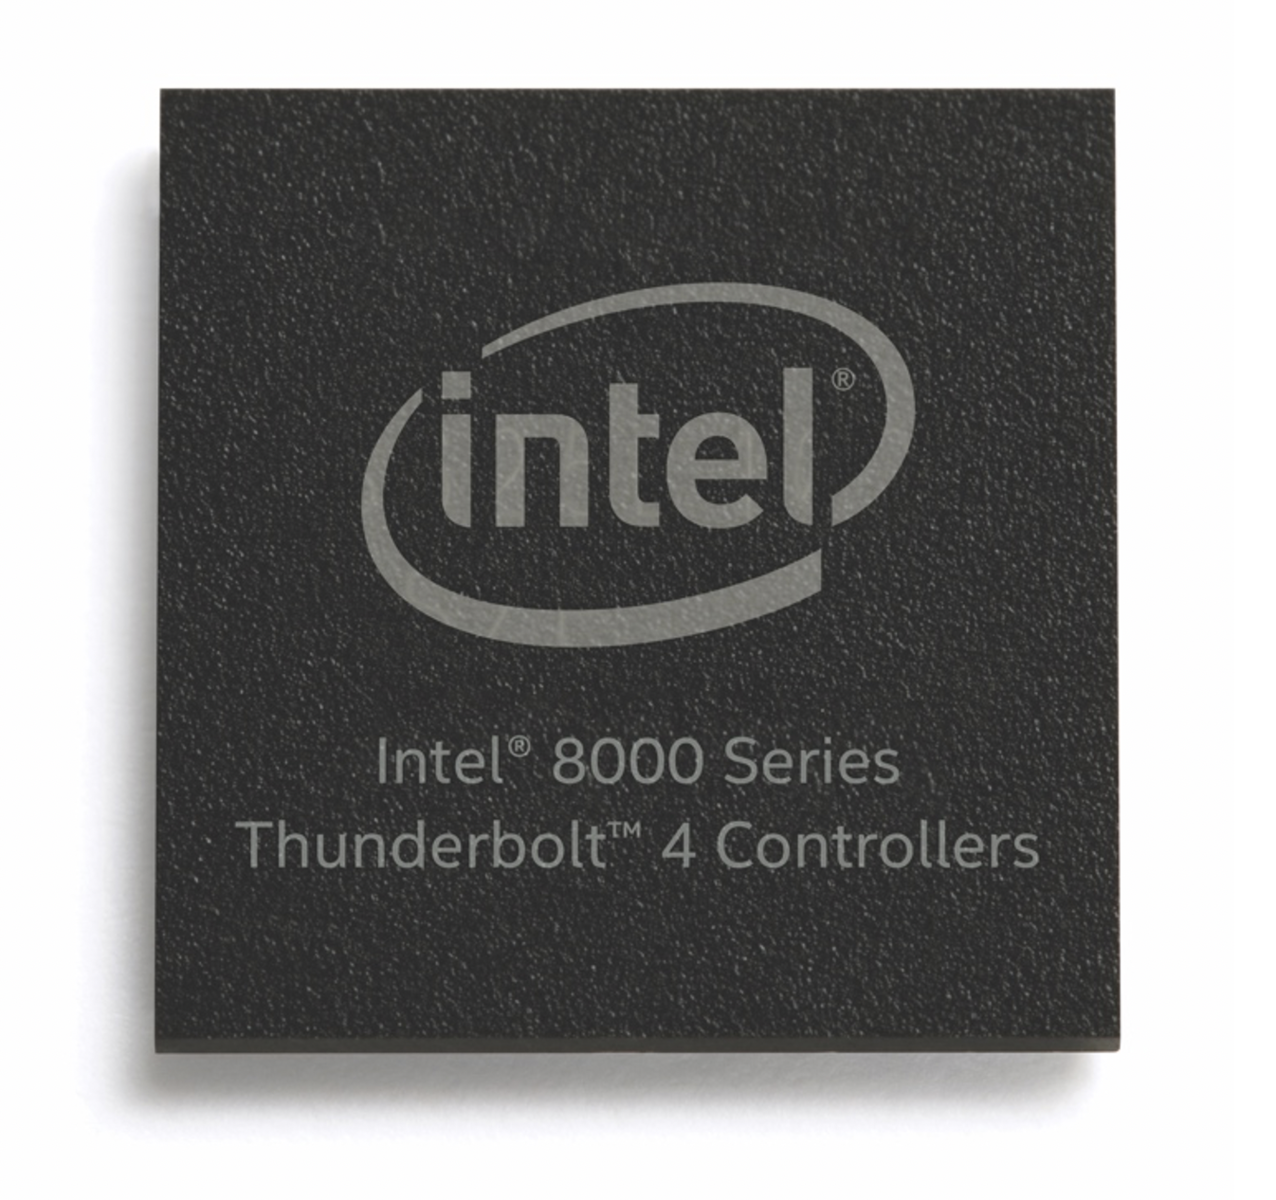 Intel Details Thunderbolt 4, Aims to Expand Model of Universal Cable Connectivity